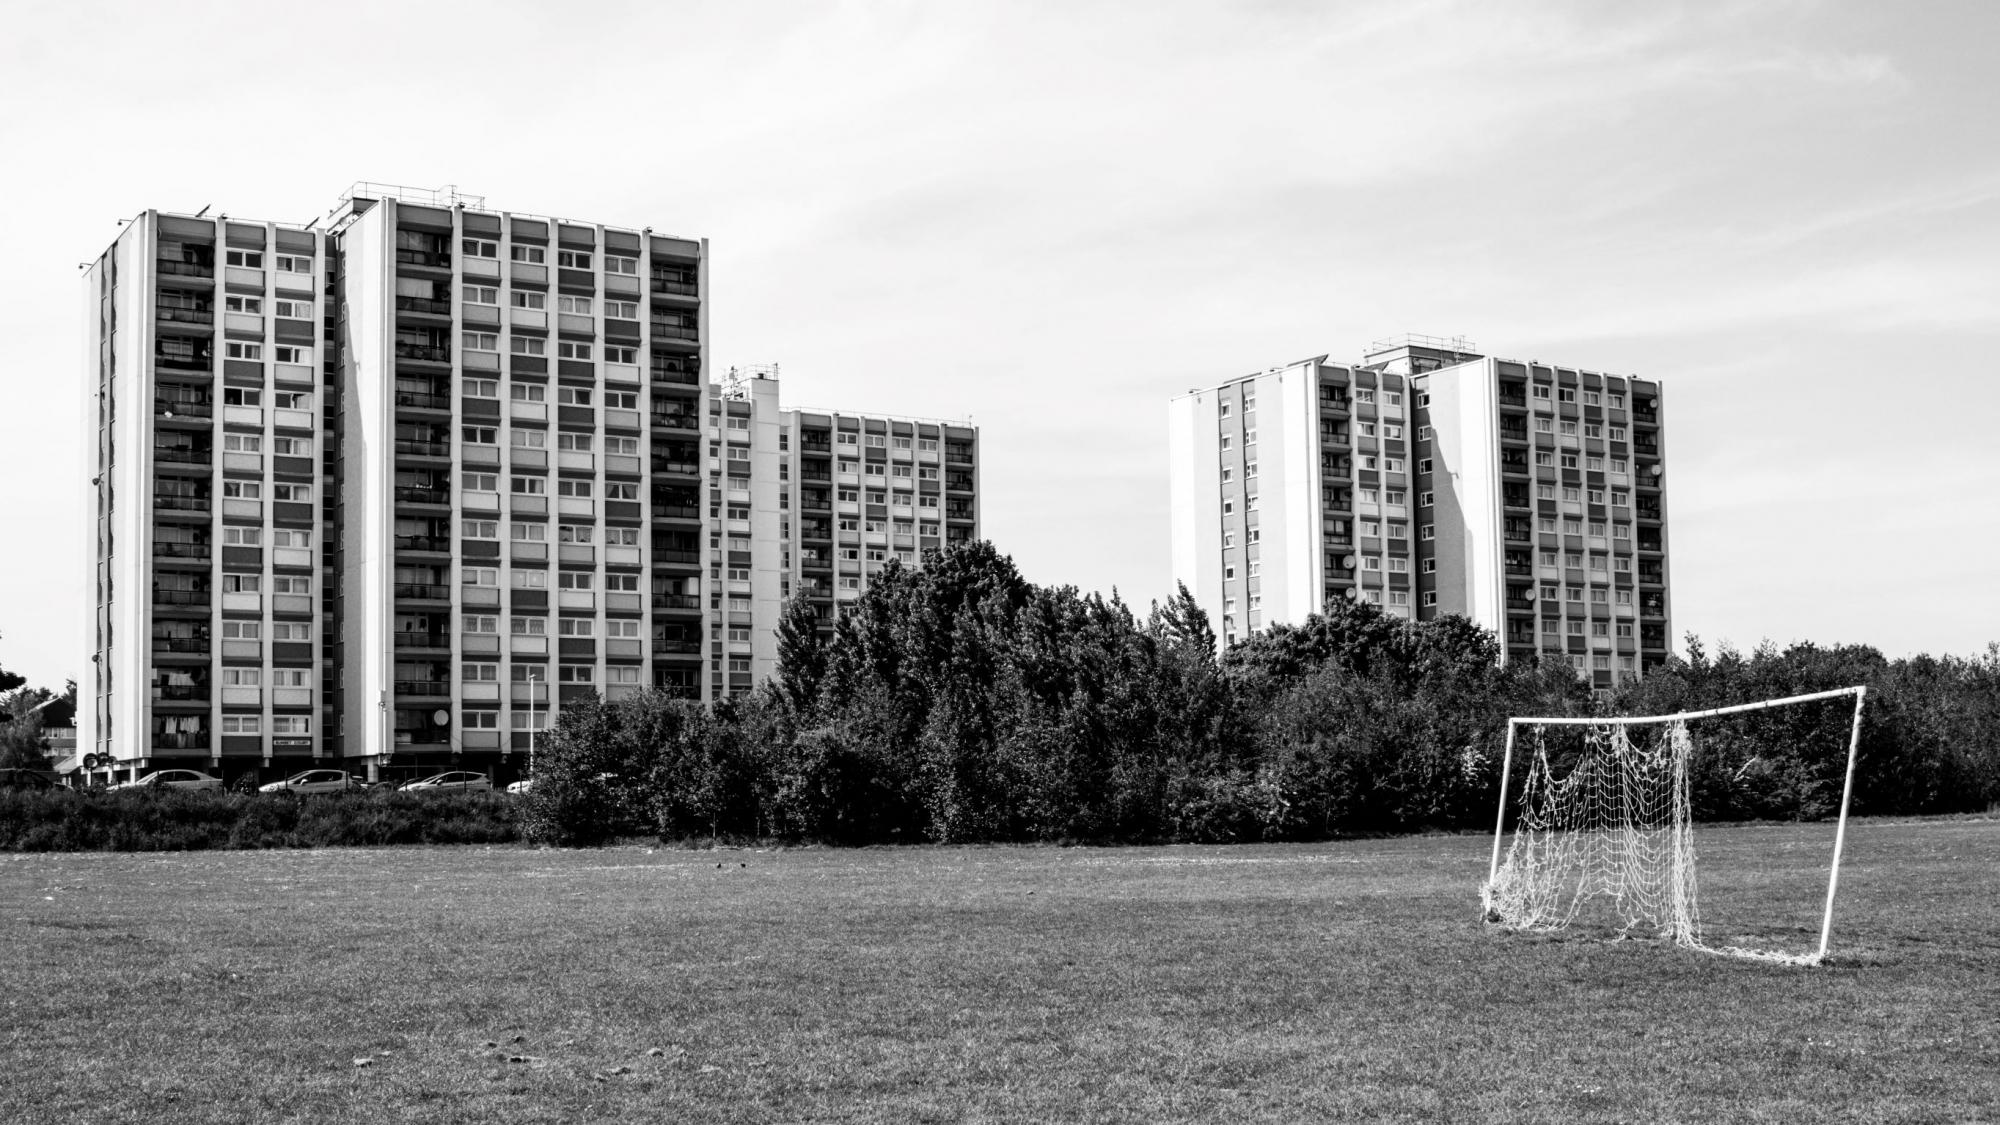 Black and white image of a playing field in front of three blocks of flats